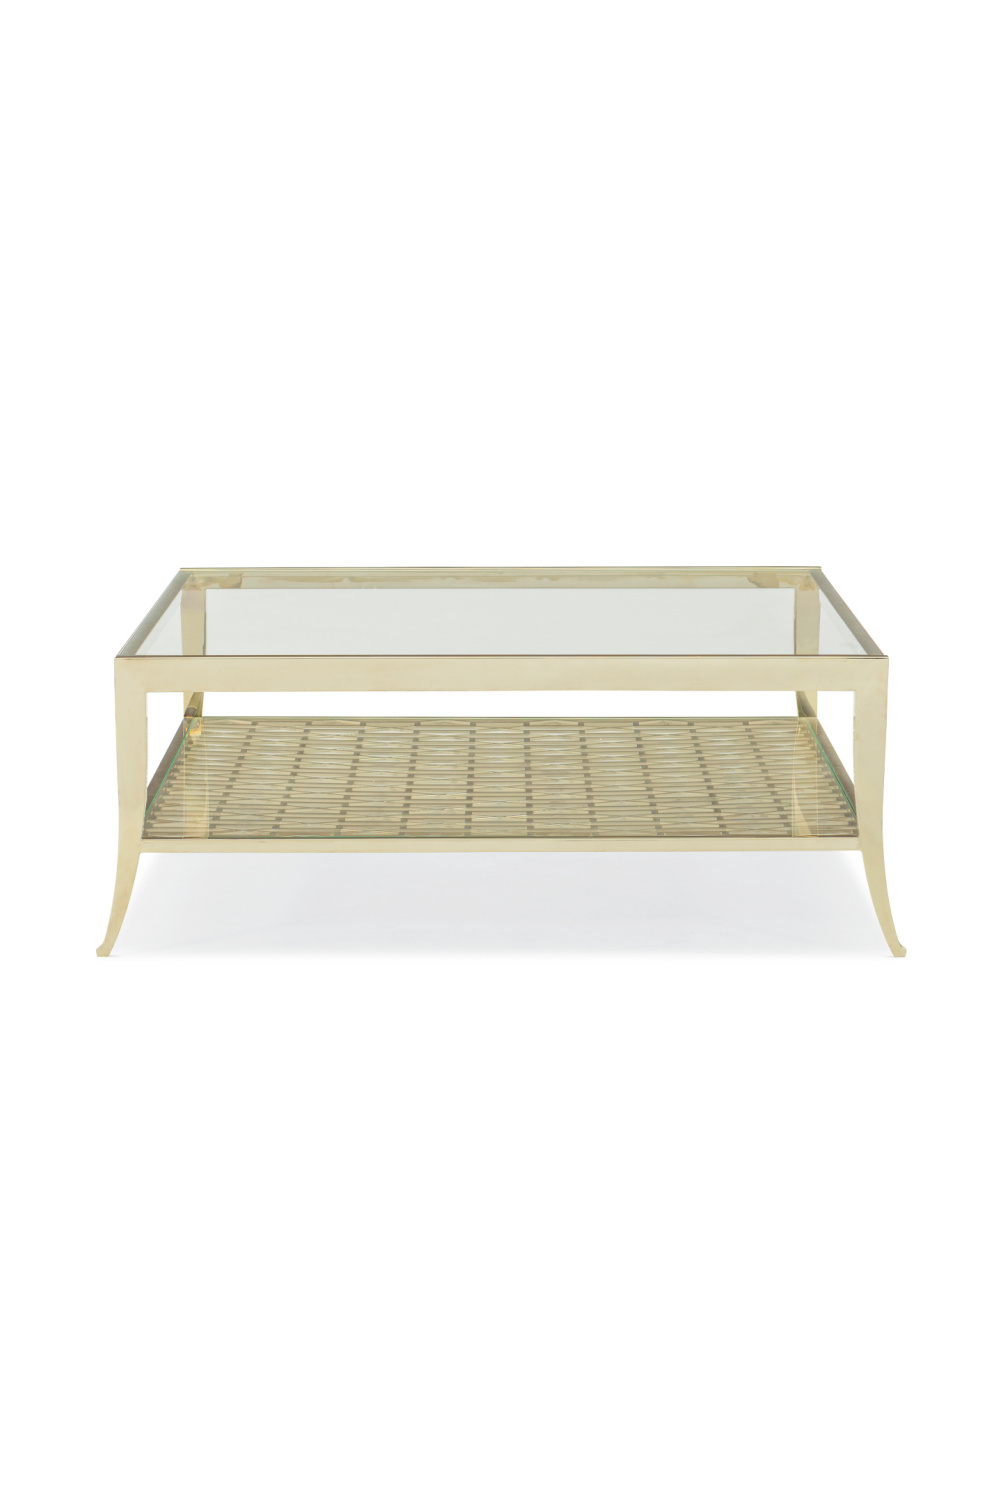 Gold Square Coffee Table | Caracole Pattern Recognition | Oroa.com